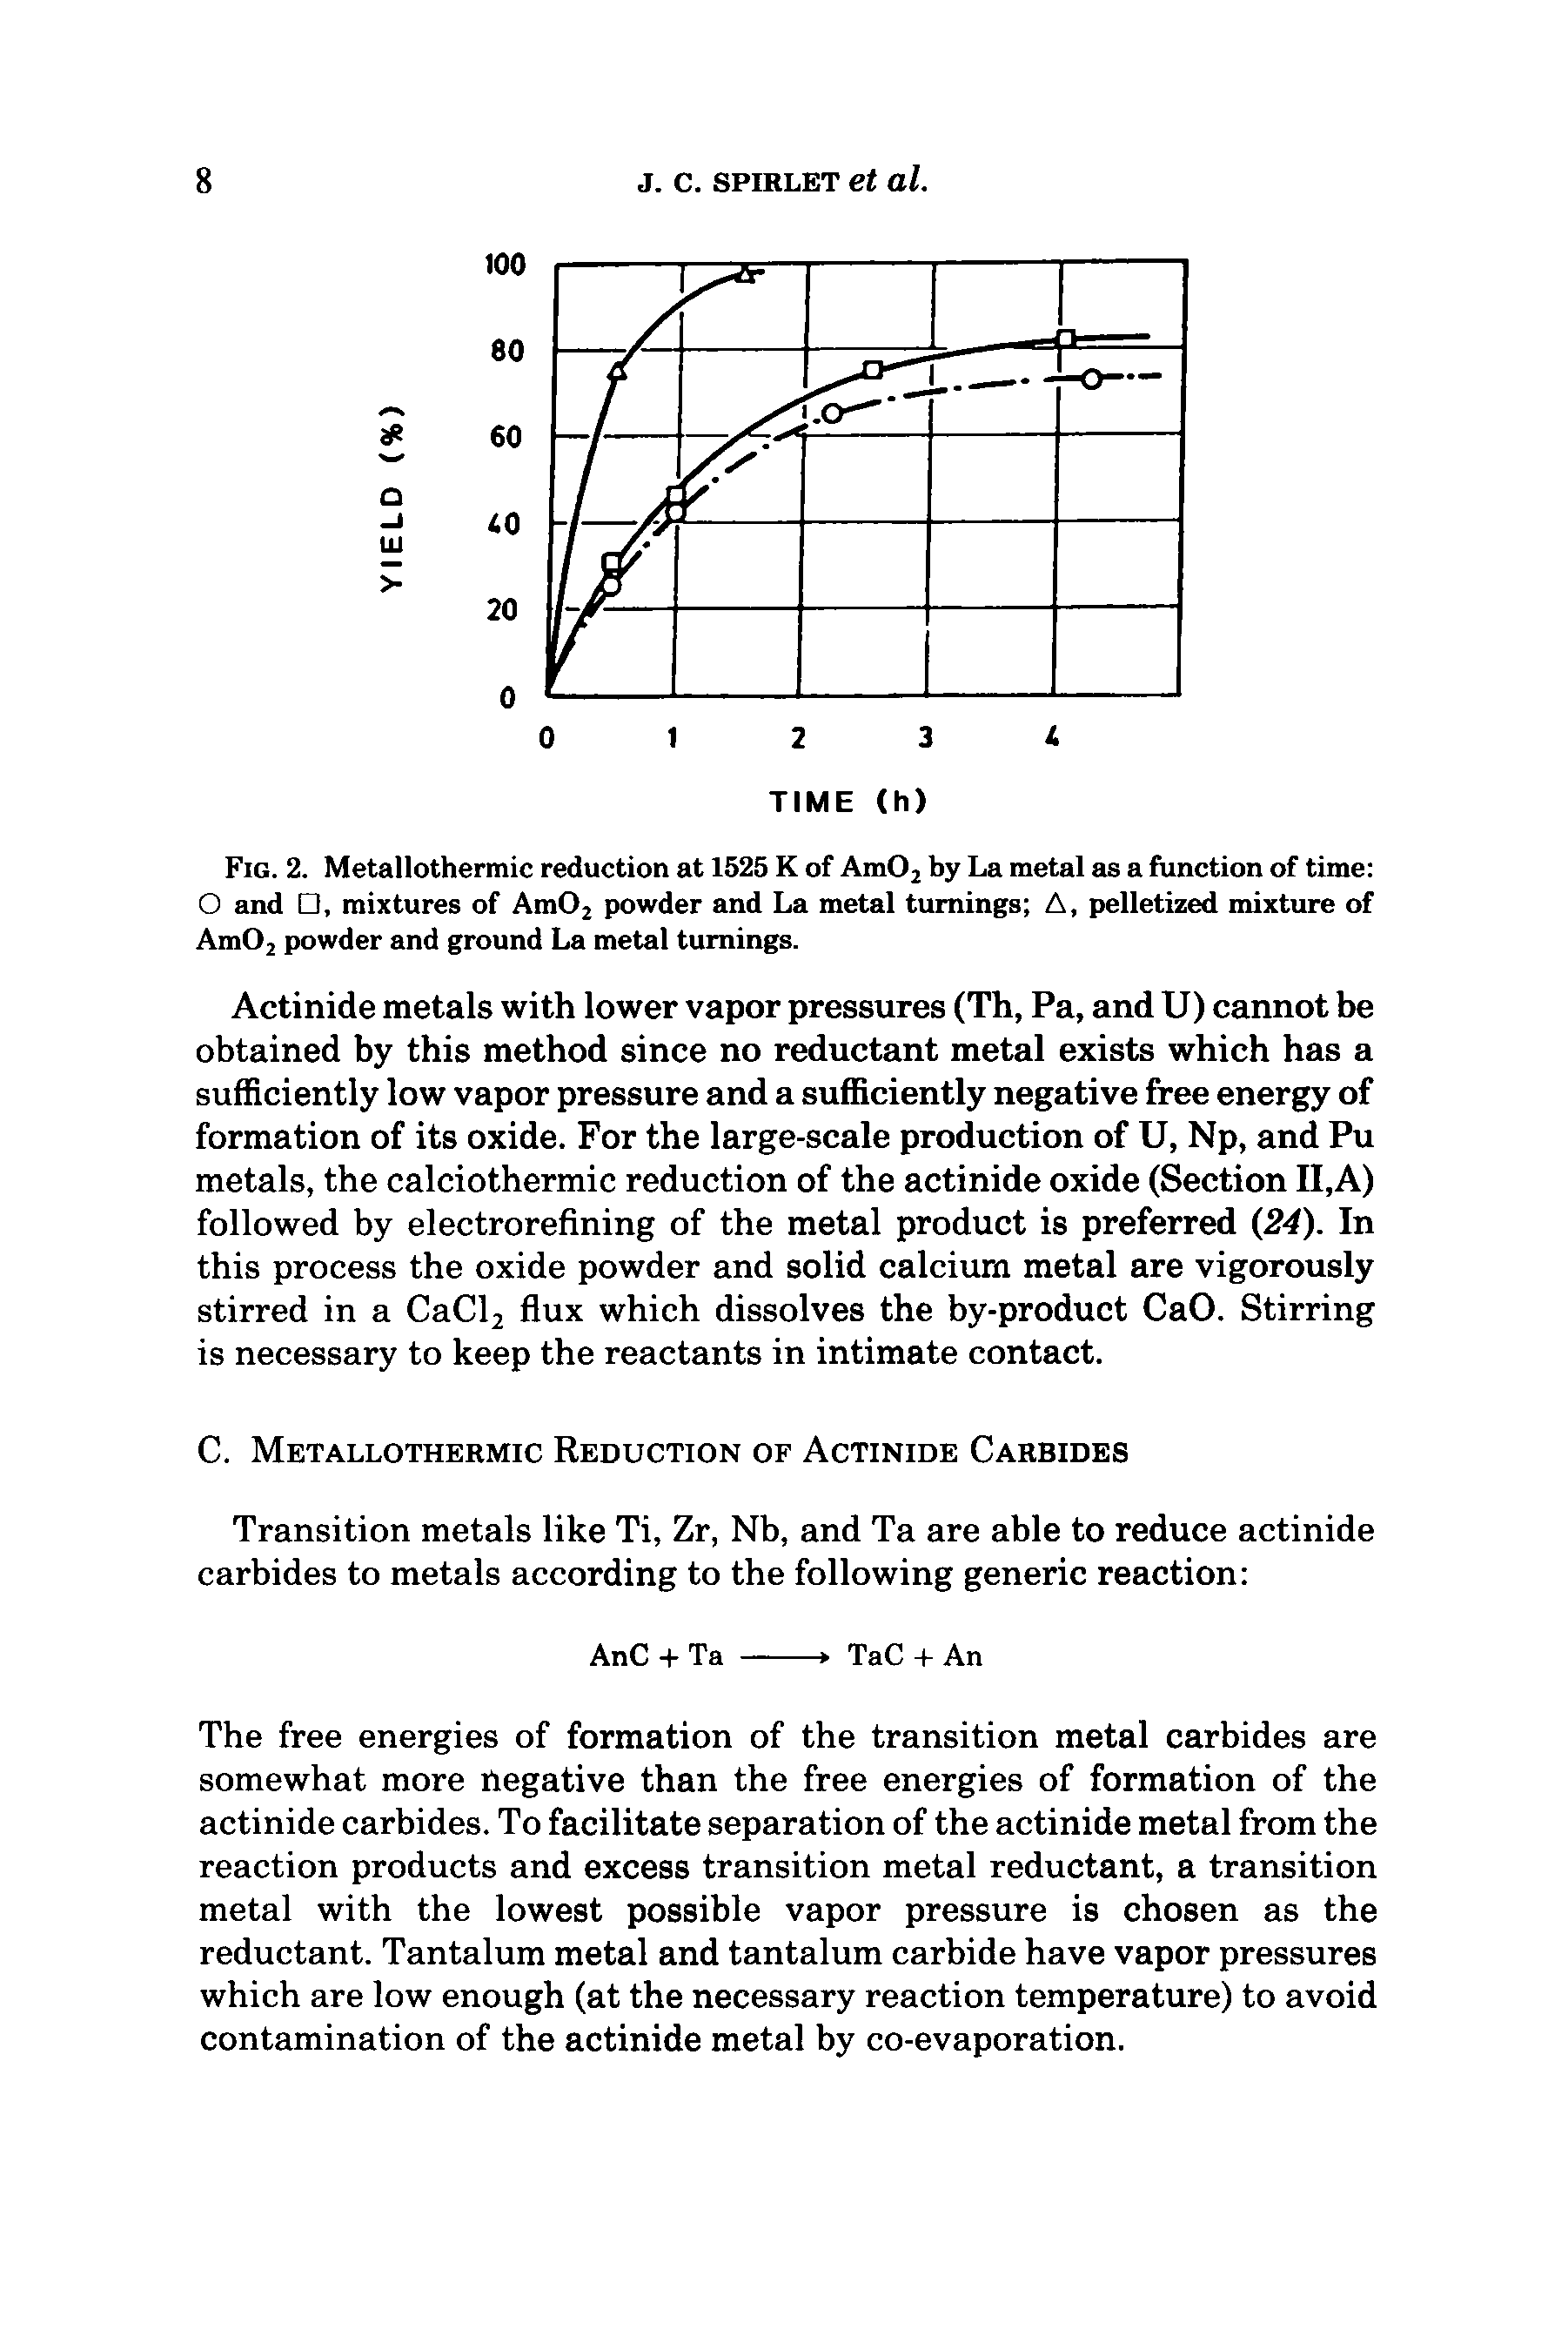 Fig. 2. Metallothermic reduction at 1525 K of Am02 by La metal as a function of time O and , mixtures of Am02 powder and La metal turnings A, pelletized mixture of Am02 powder and ground La metal turnings.